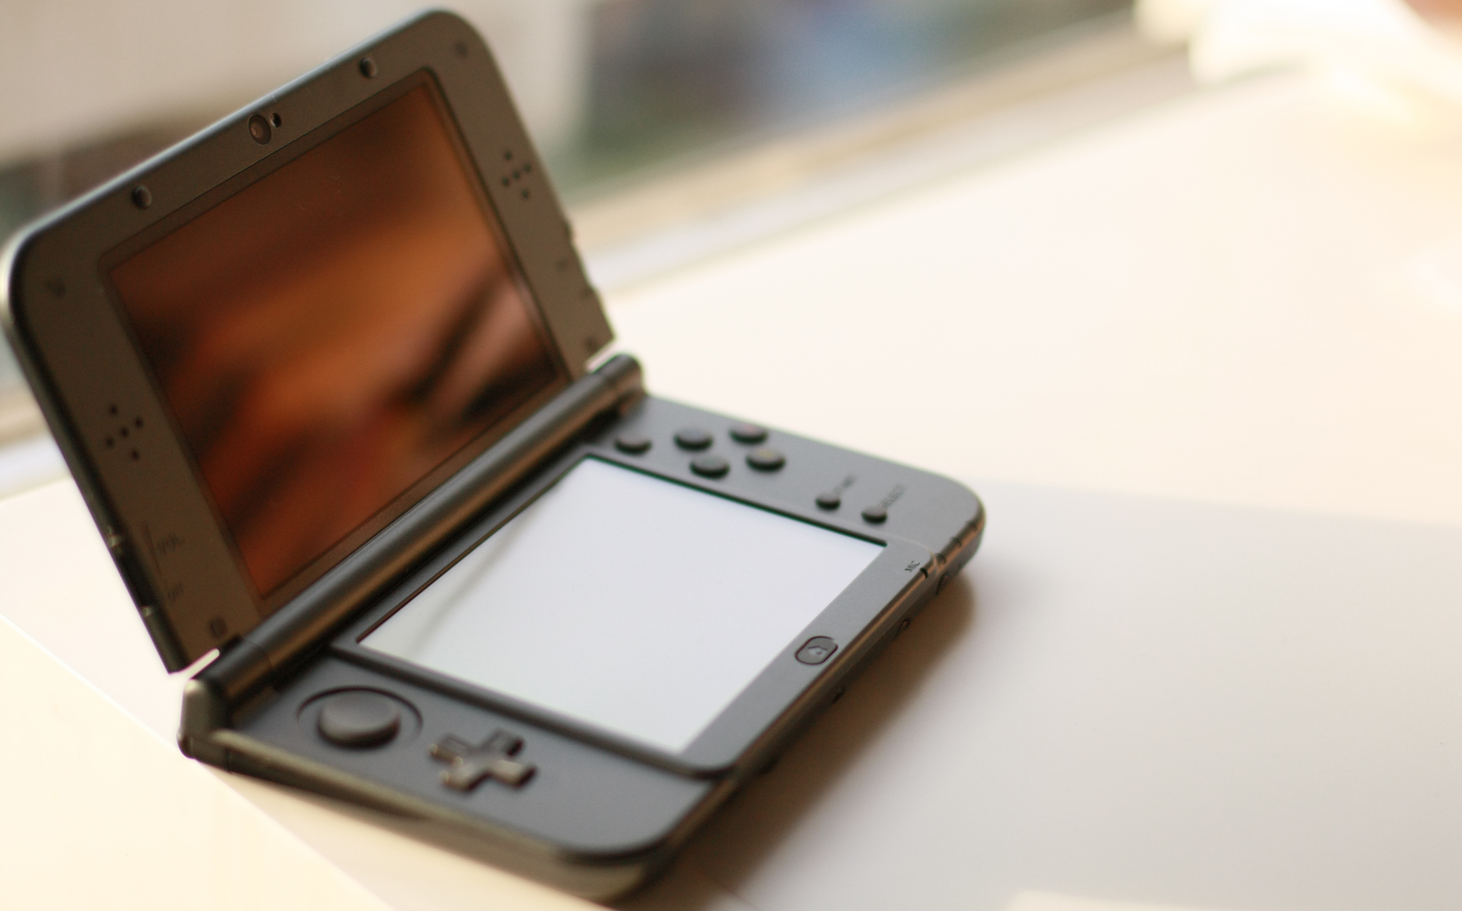 What It’s Like To Play The Hottest Upcoming Games On The New 3DS